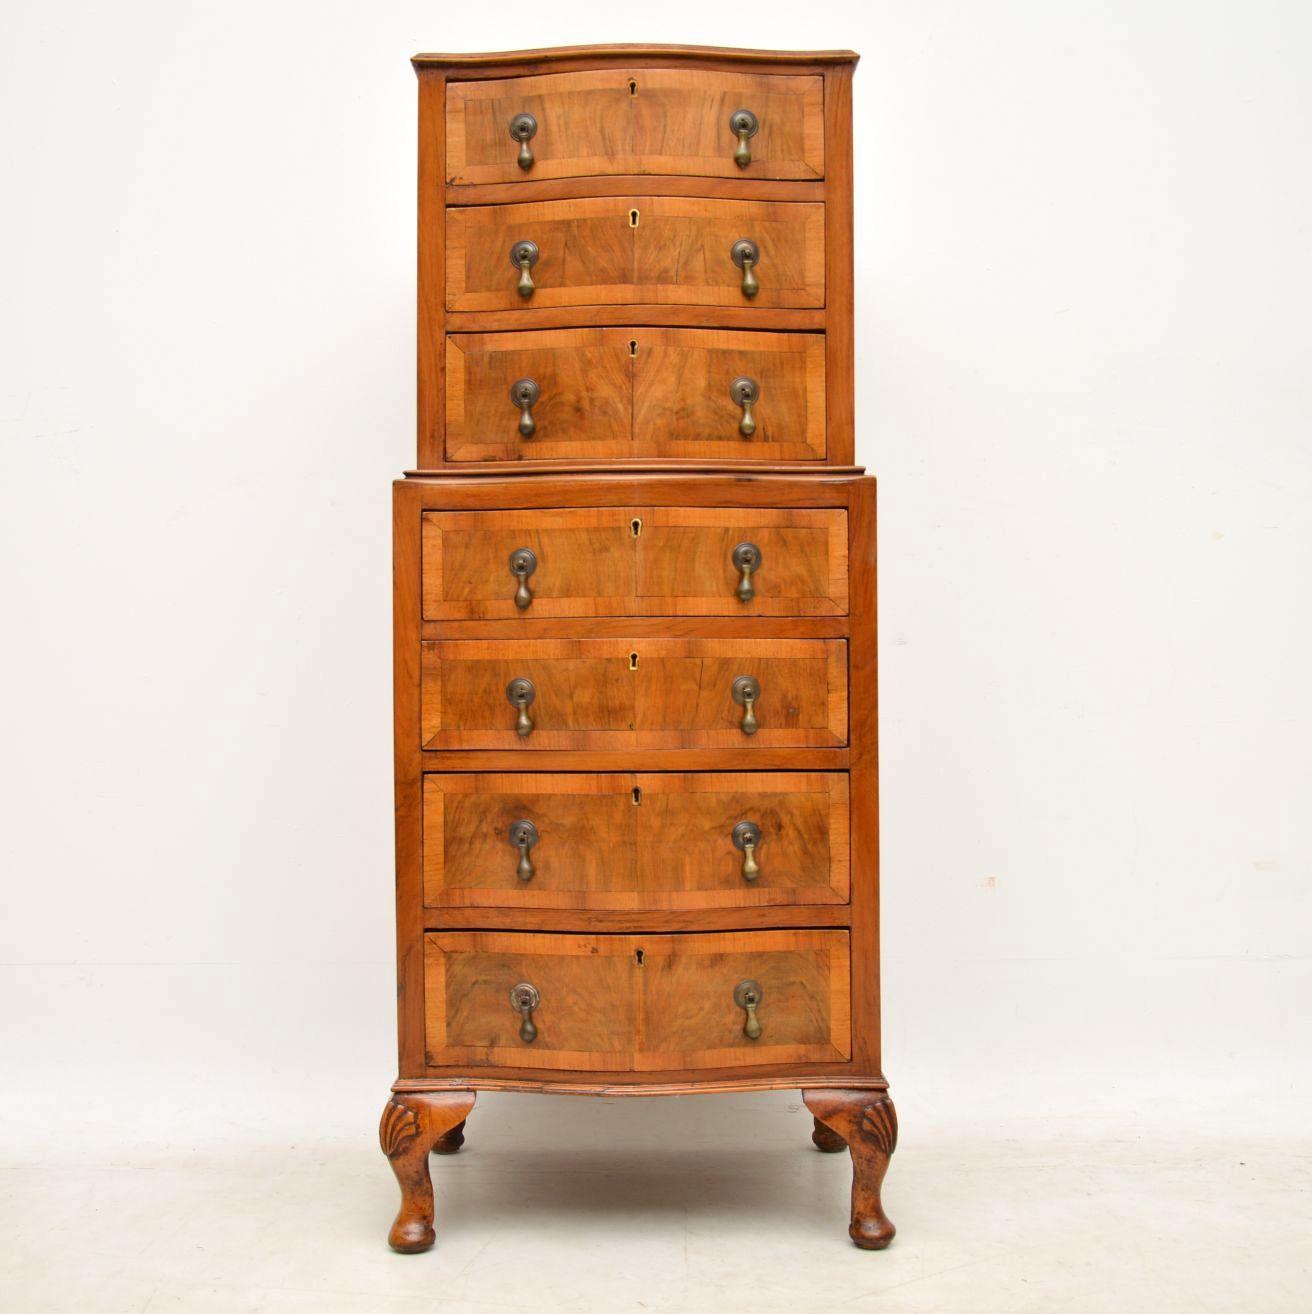 Small proportioned antique figured walnut chest on chest with a serpentine shaped front. It’s in good condition, dating from around the 1890-1910 period & separates into two halves. This chest has a lovely warm honey color. The top is cross banded